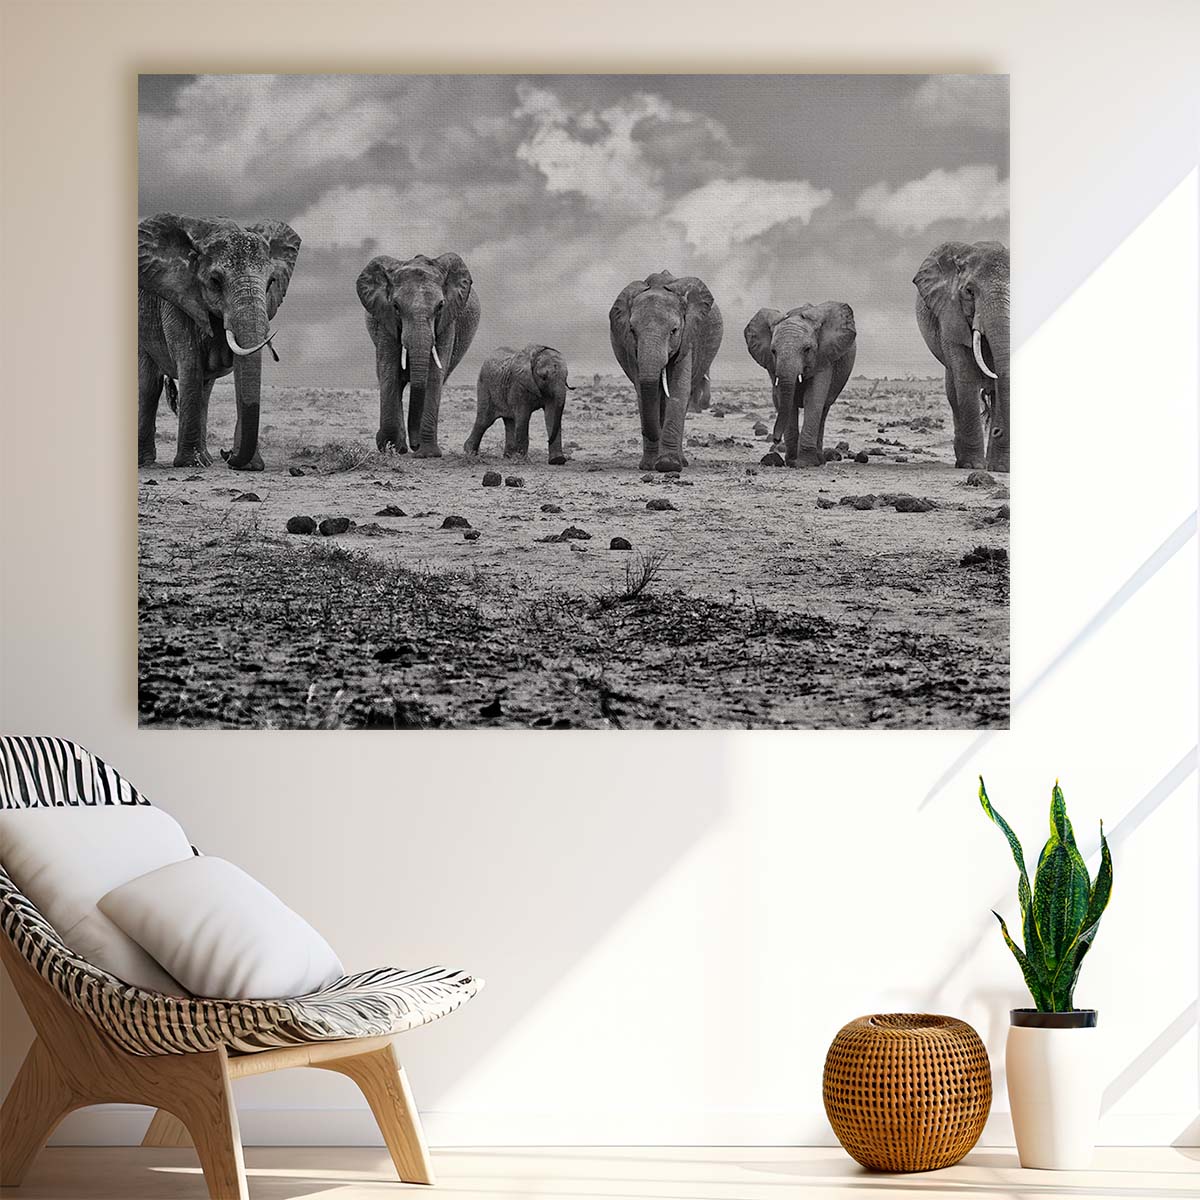 Majestic Elephant Family Safari Monochrome Wall Art by Luxuriance Designs. Made in USA.